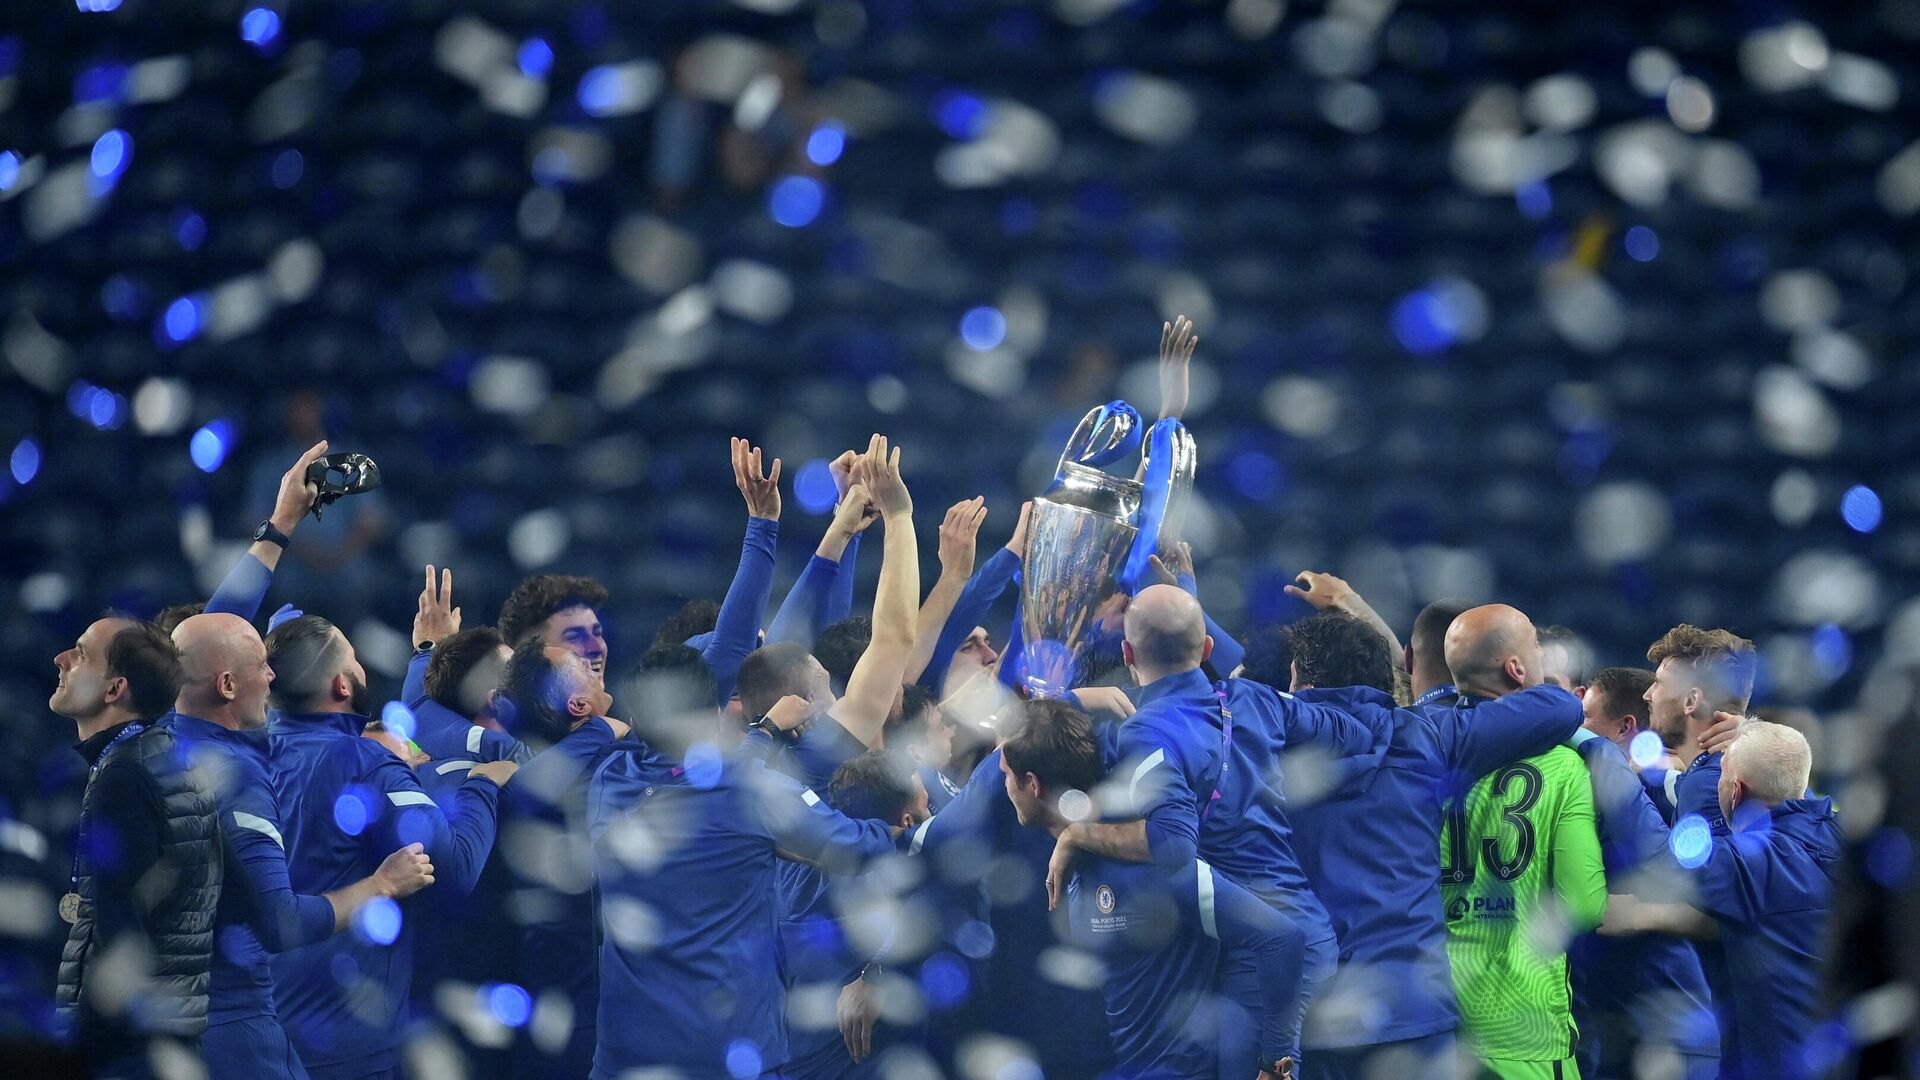 Soccer Football - Champions League Final - Manchester City v Chelsea - Estadio do Dragao, Porto, Portugal - May 29, 2021 Chelsea players celebrates with the trophy as Chelsea manager Thomas Tuchel (L) looks on after winning the Champions League Pool via REUTERS/David Ramos     TPX IMAGES OF THE DAY - РИА Новости, 1920, 30.05.2021